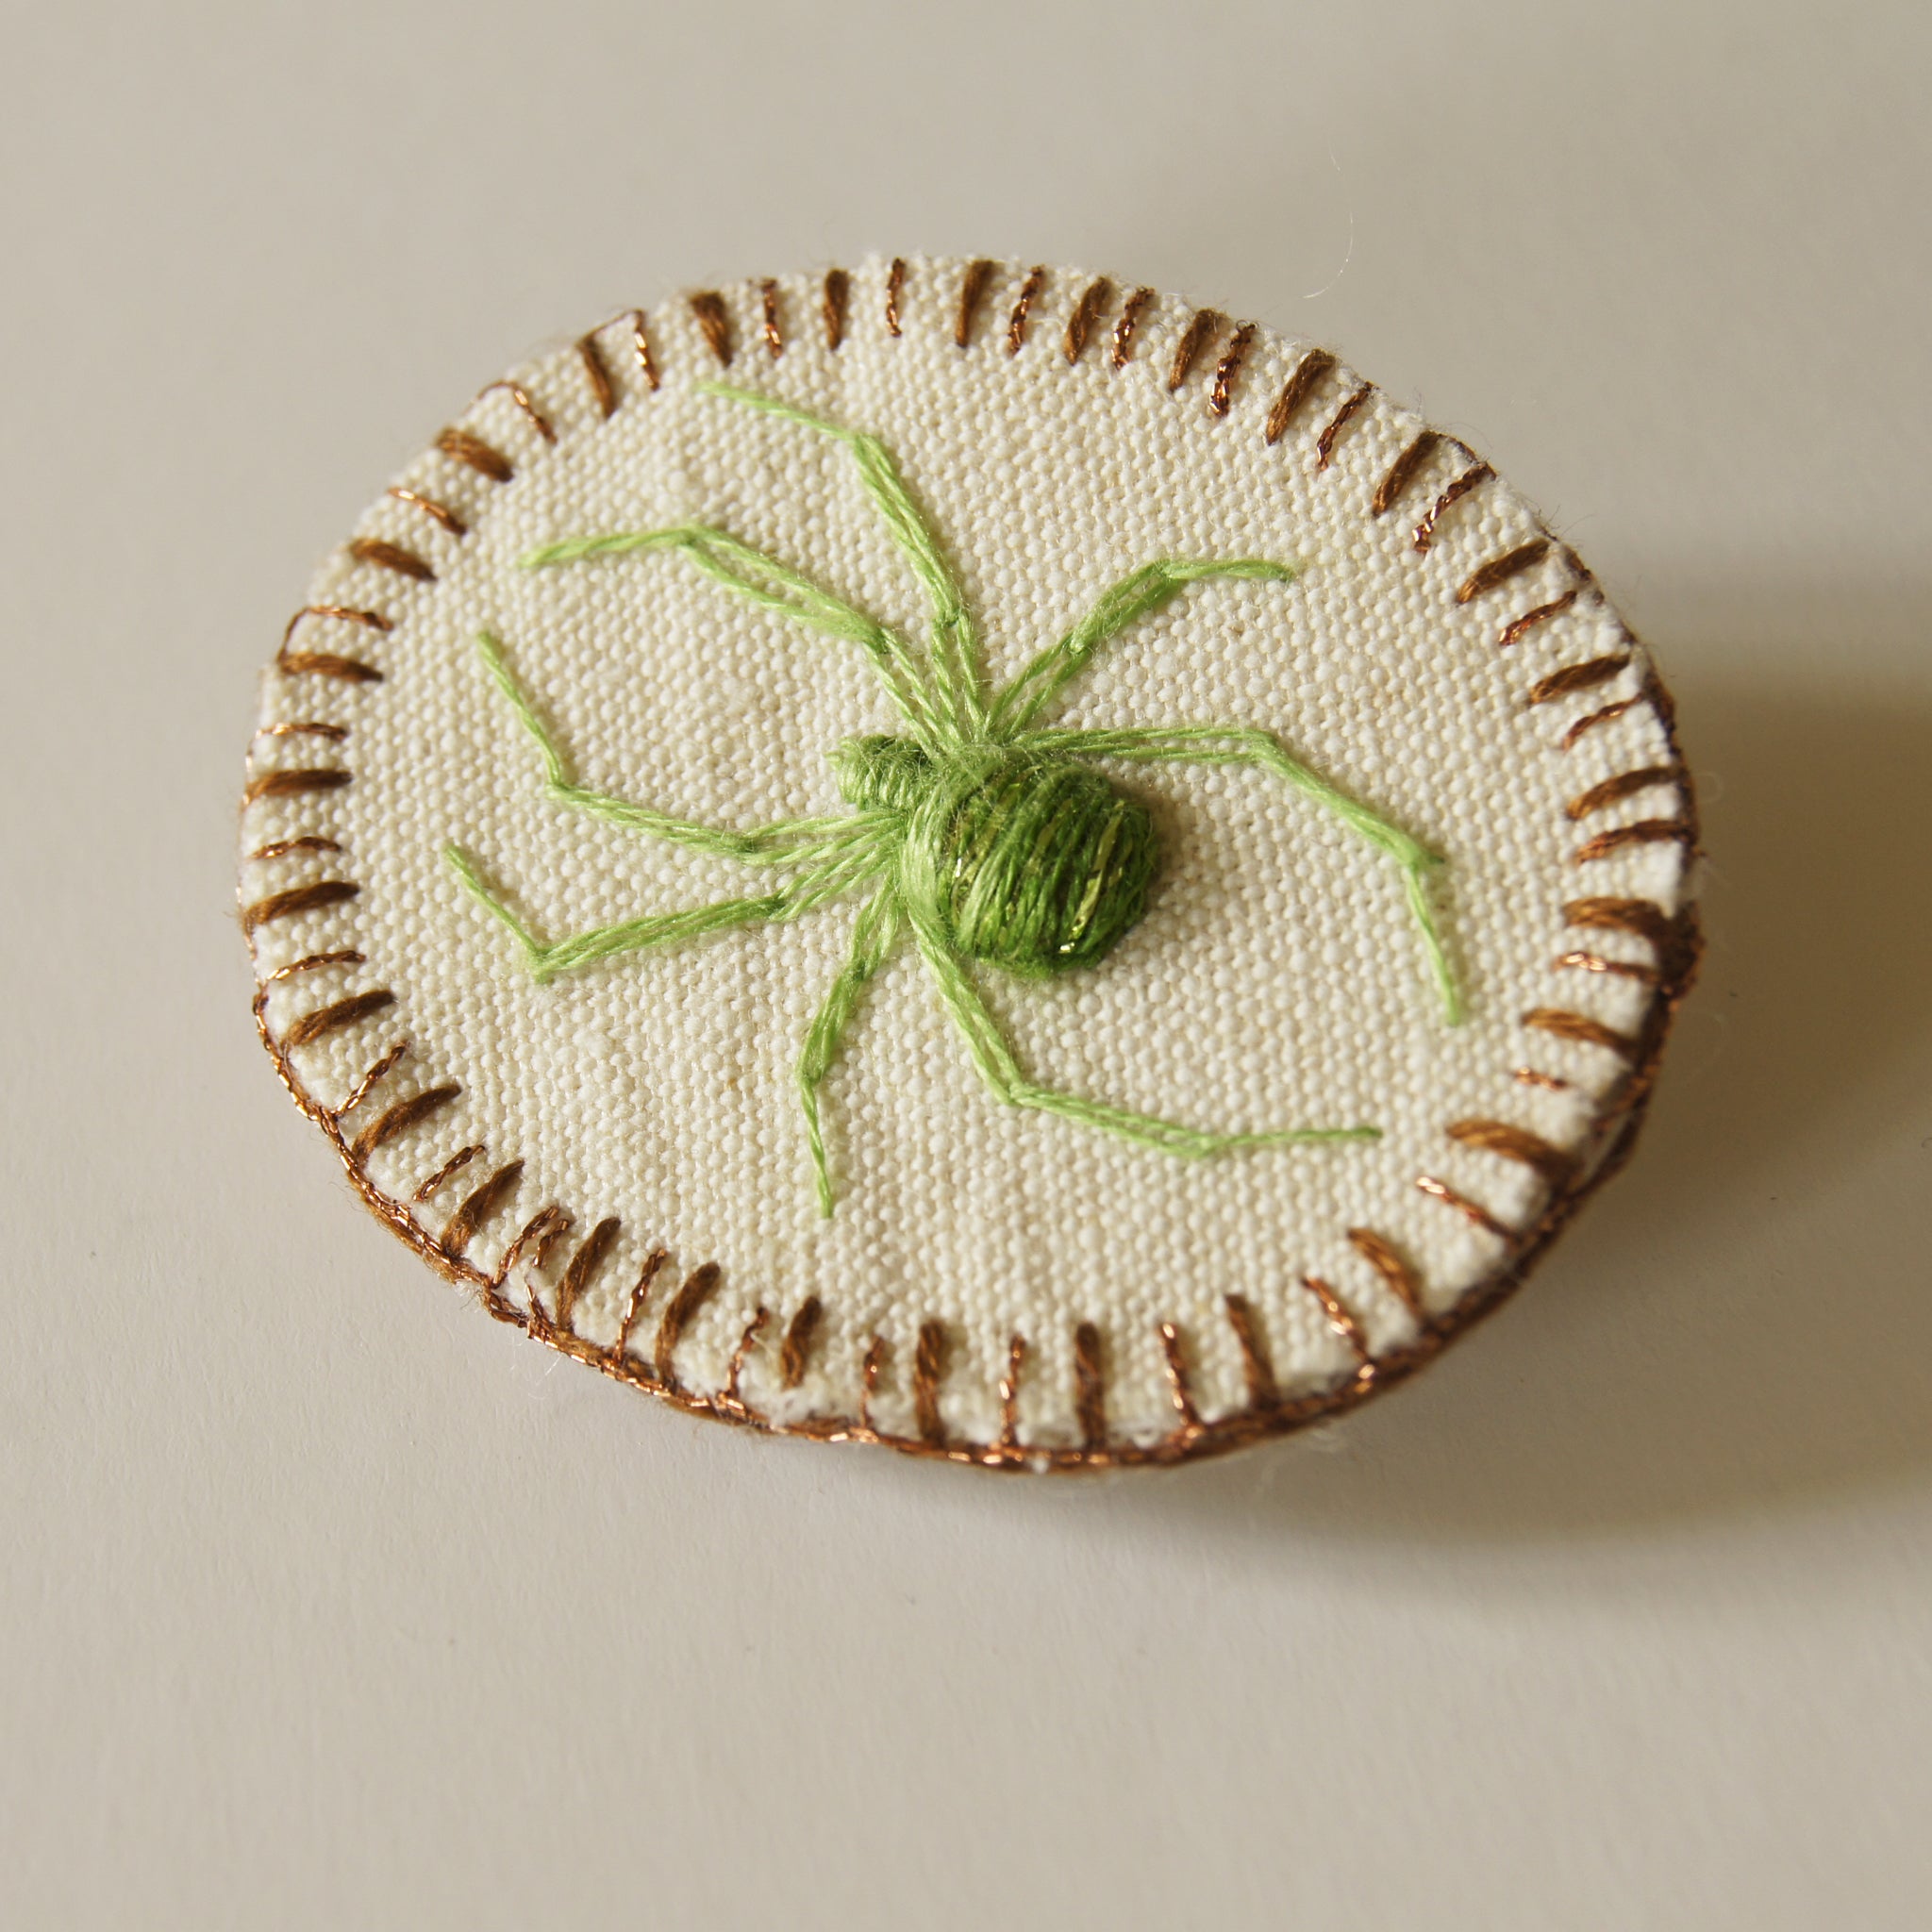 I made a spider brooch from resin and dandelion fluff : r/handmade